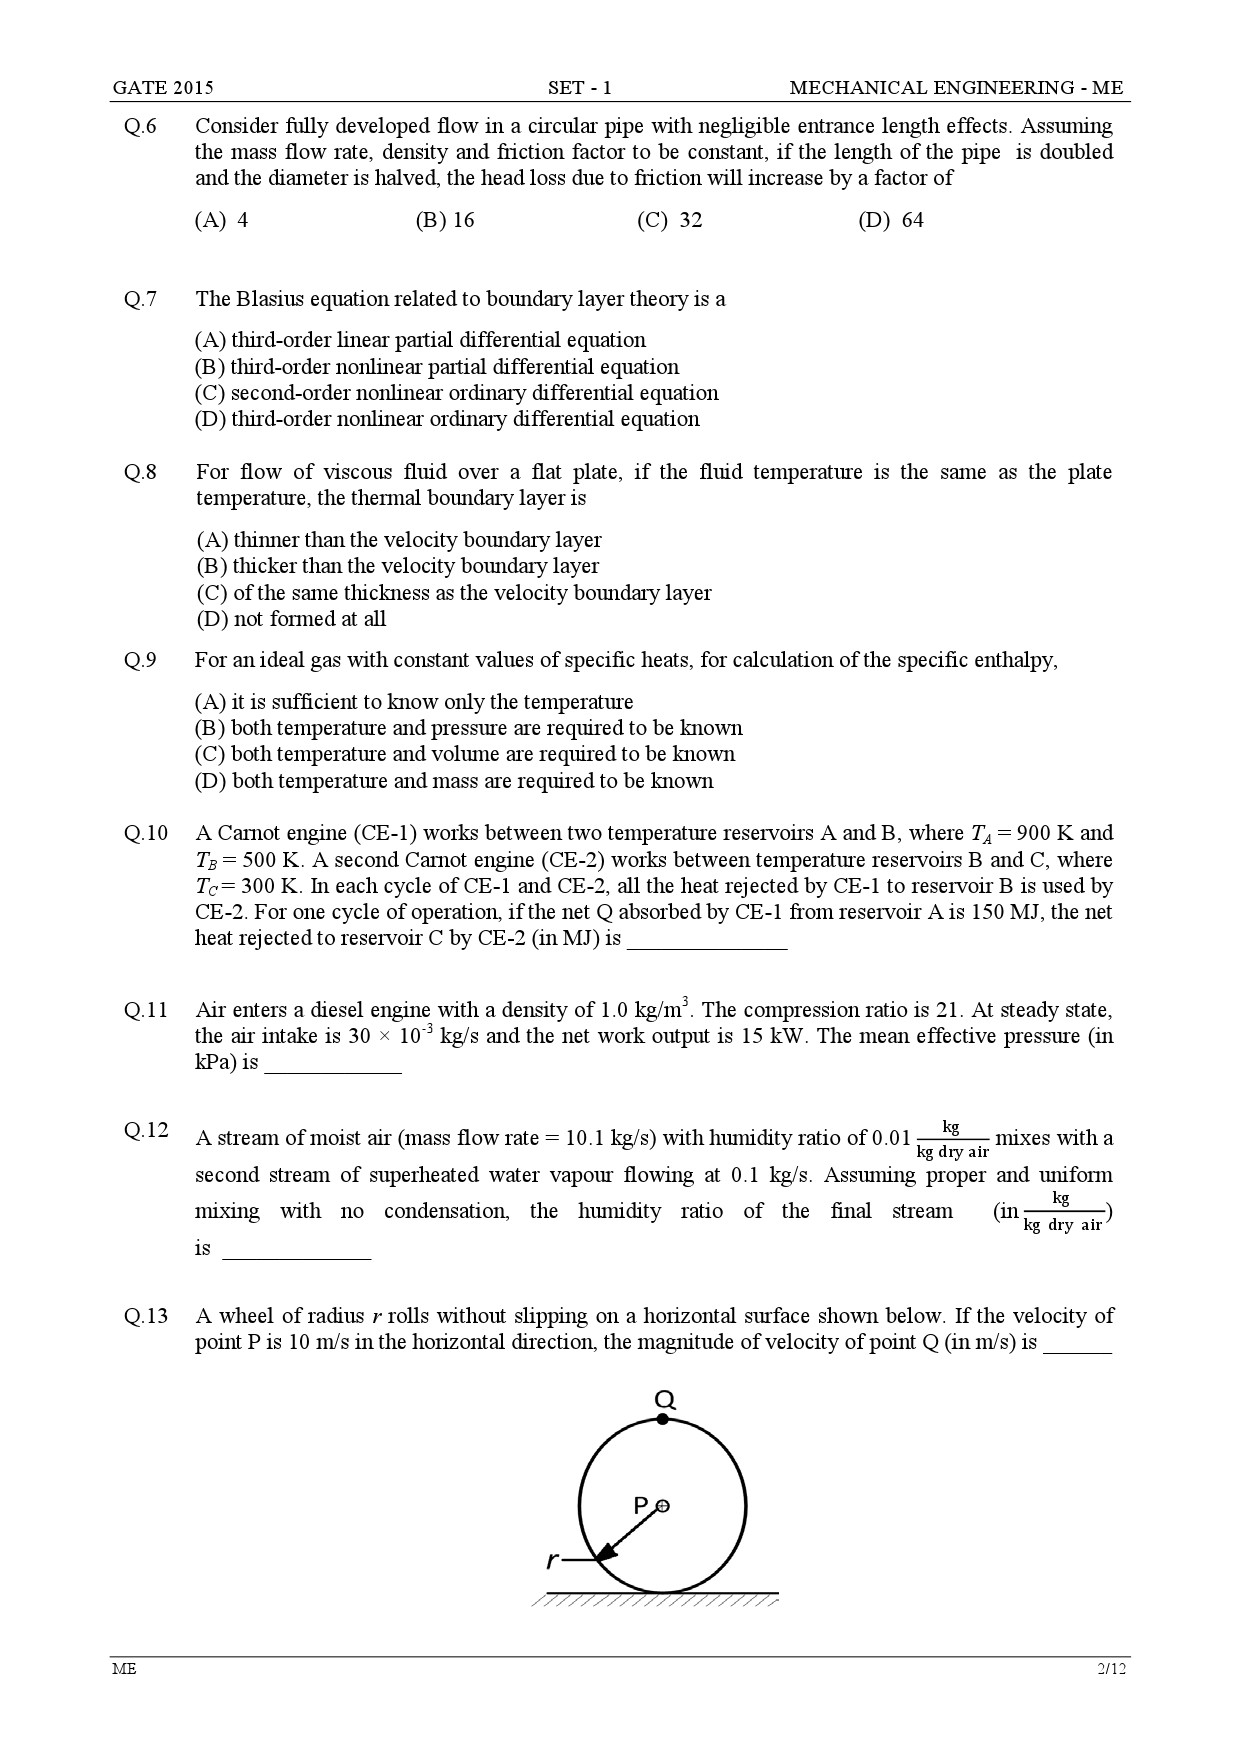 GATE Exam Question Paper 2015 Mechanical Engineering Set 1 2